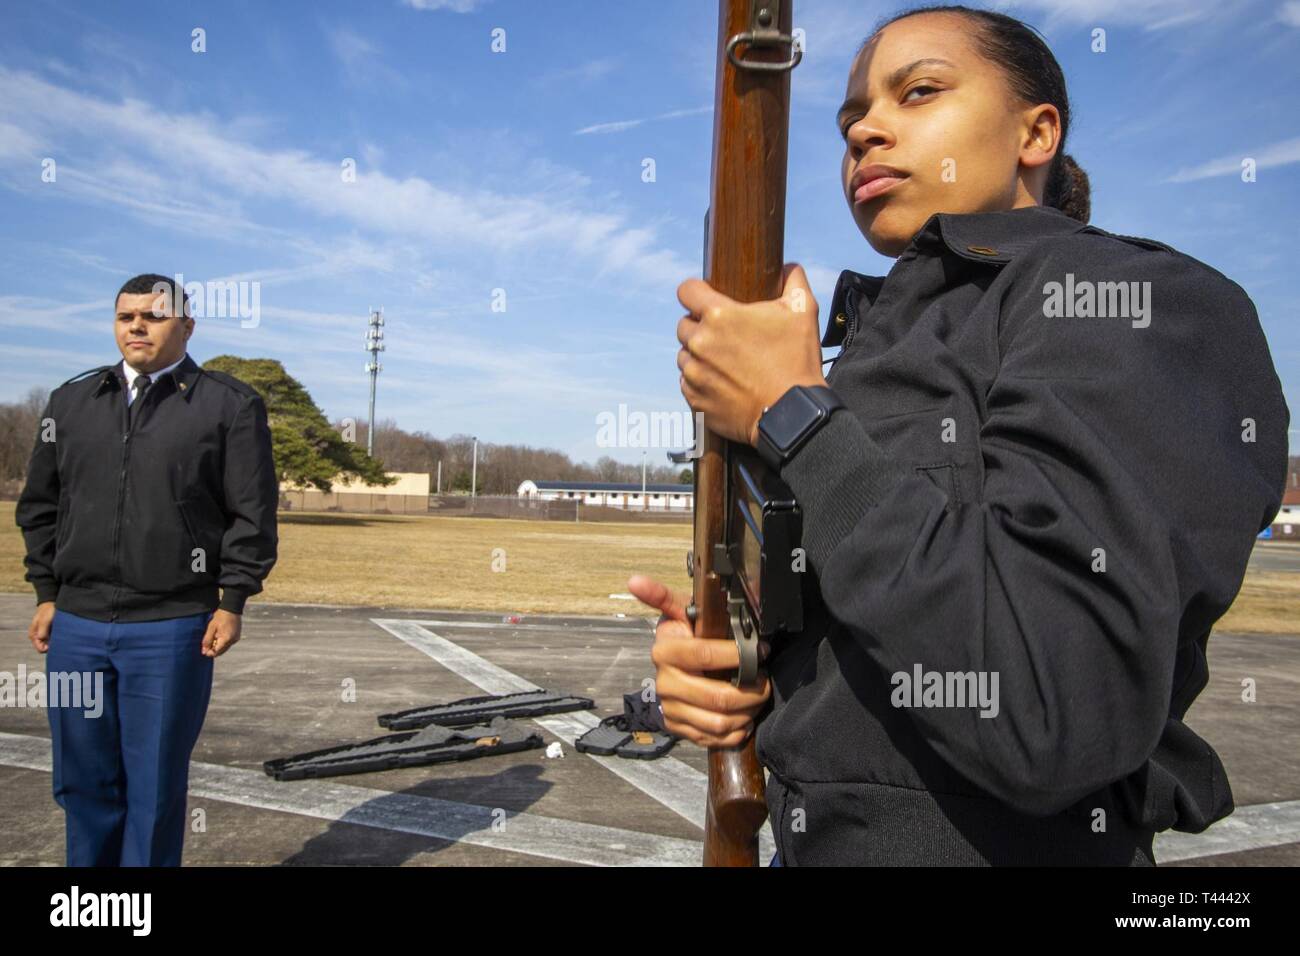 Firing party commander U.S. Army Spc. Aldo A. Posas, left, stands at attention as Pfc. Janee S. Simpler, both members of the New Jersey National Guard Honor Guard, prepares to fire her M-14 rifle during three-Soldier firing party training at the parade field at the National Guard Armory in Lawrenceville, N.J., March 14, 2019. During this practice, the Soldiers reviewed the sequence of events for a full honors firing detail, which includes a series of three volleys fired in honor of the deceased veteran by the honor guard. The three volleys represent the words duty, honor, and country.  (New Je Stock Photo